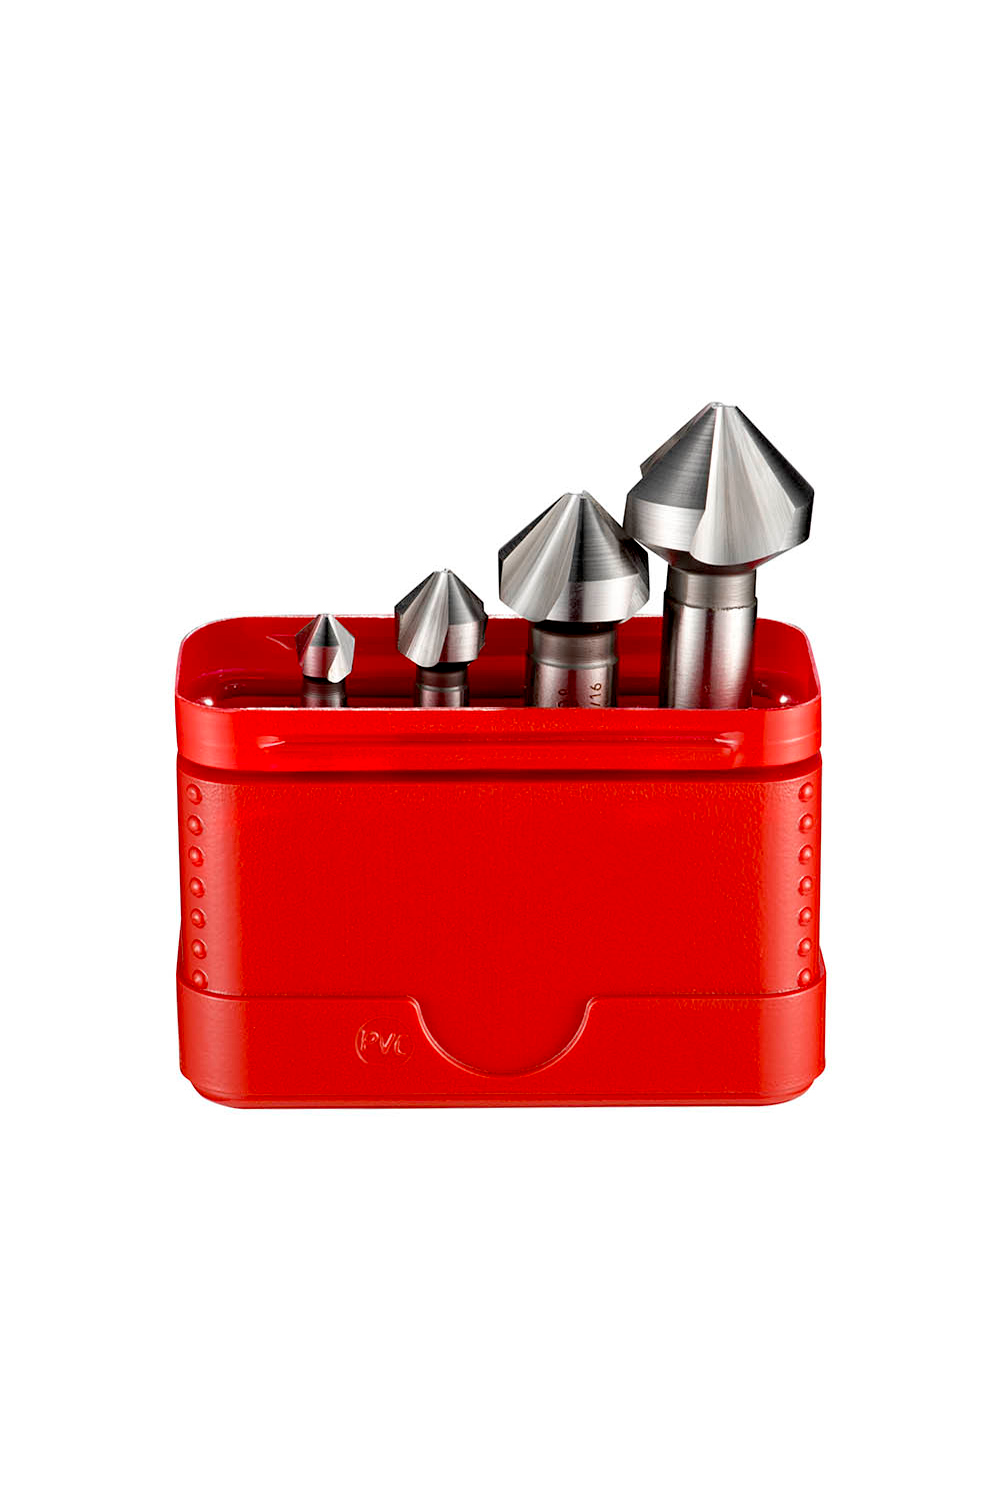 G2362 - Specialty Drill & Cutter Sets